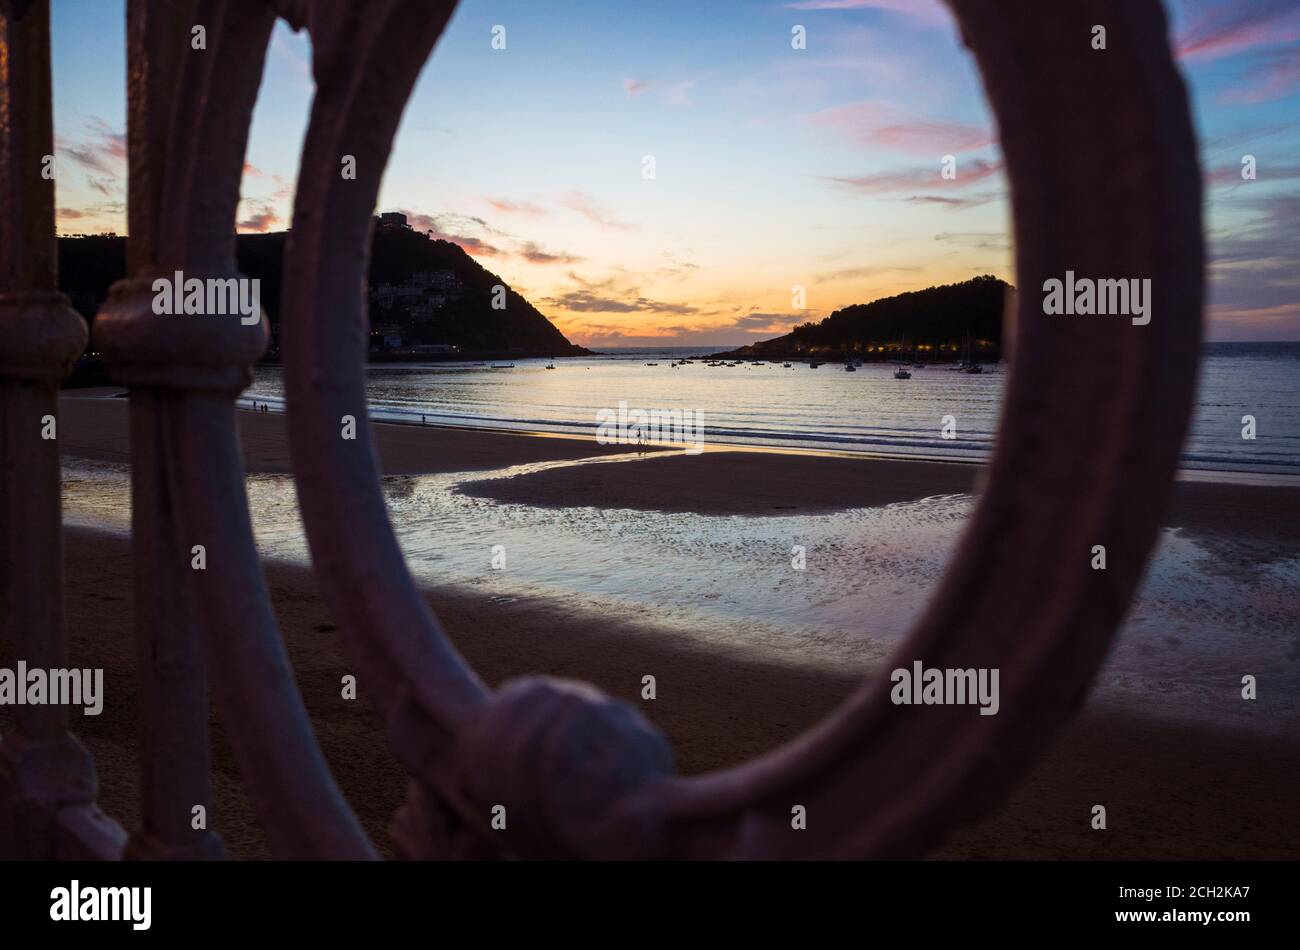 Donostia, Gipuzkoa, Basque Country, Spain - July 15th, 2019 : La Concha beach at sunset as seen through the iconic banister. Stock Photo